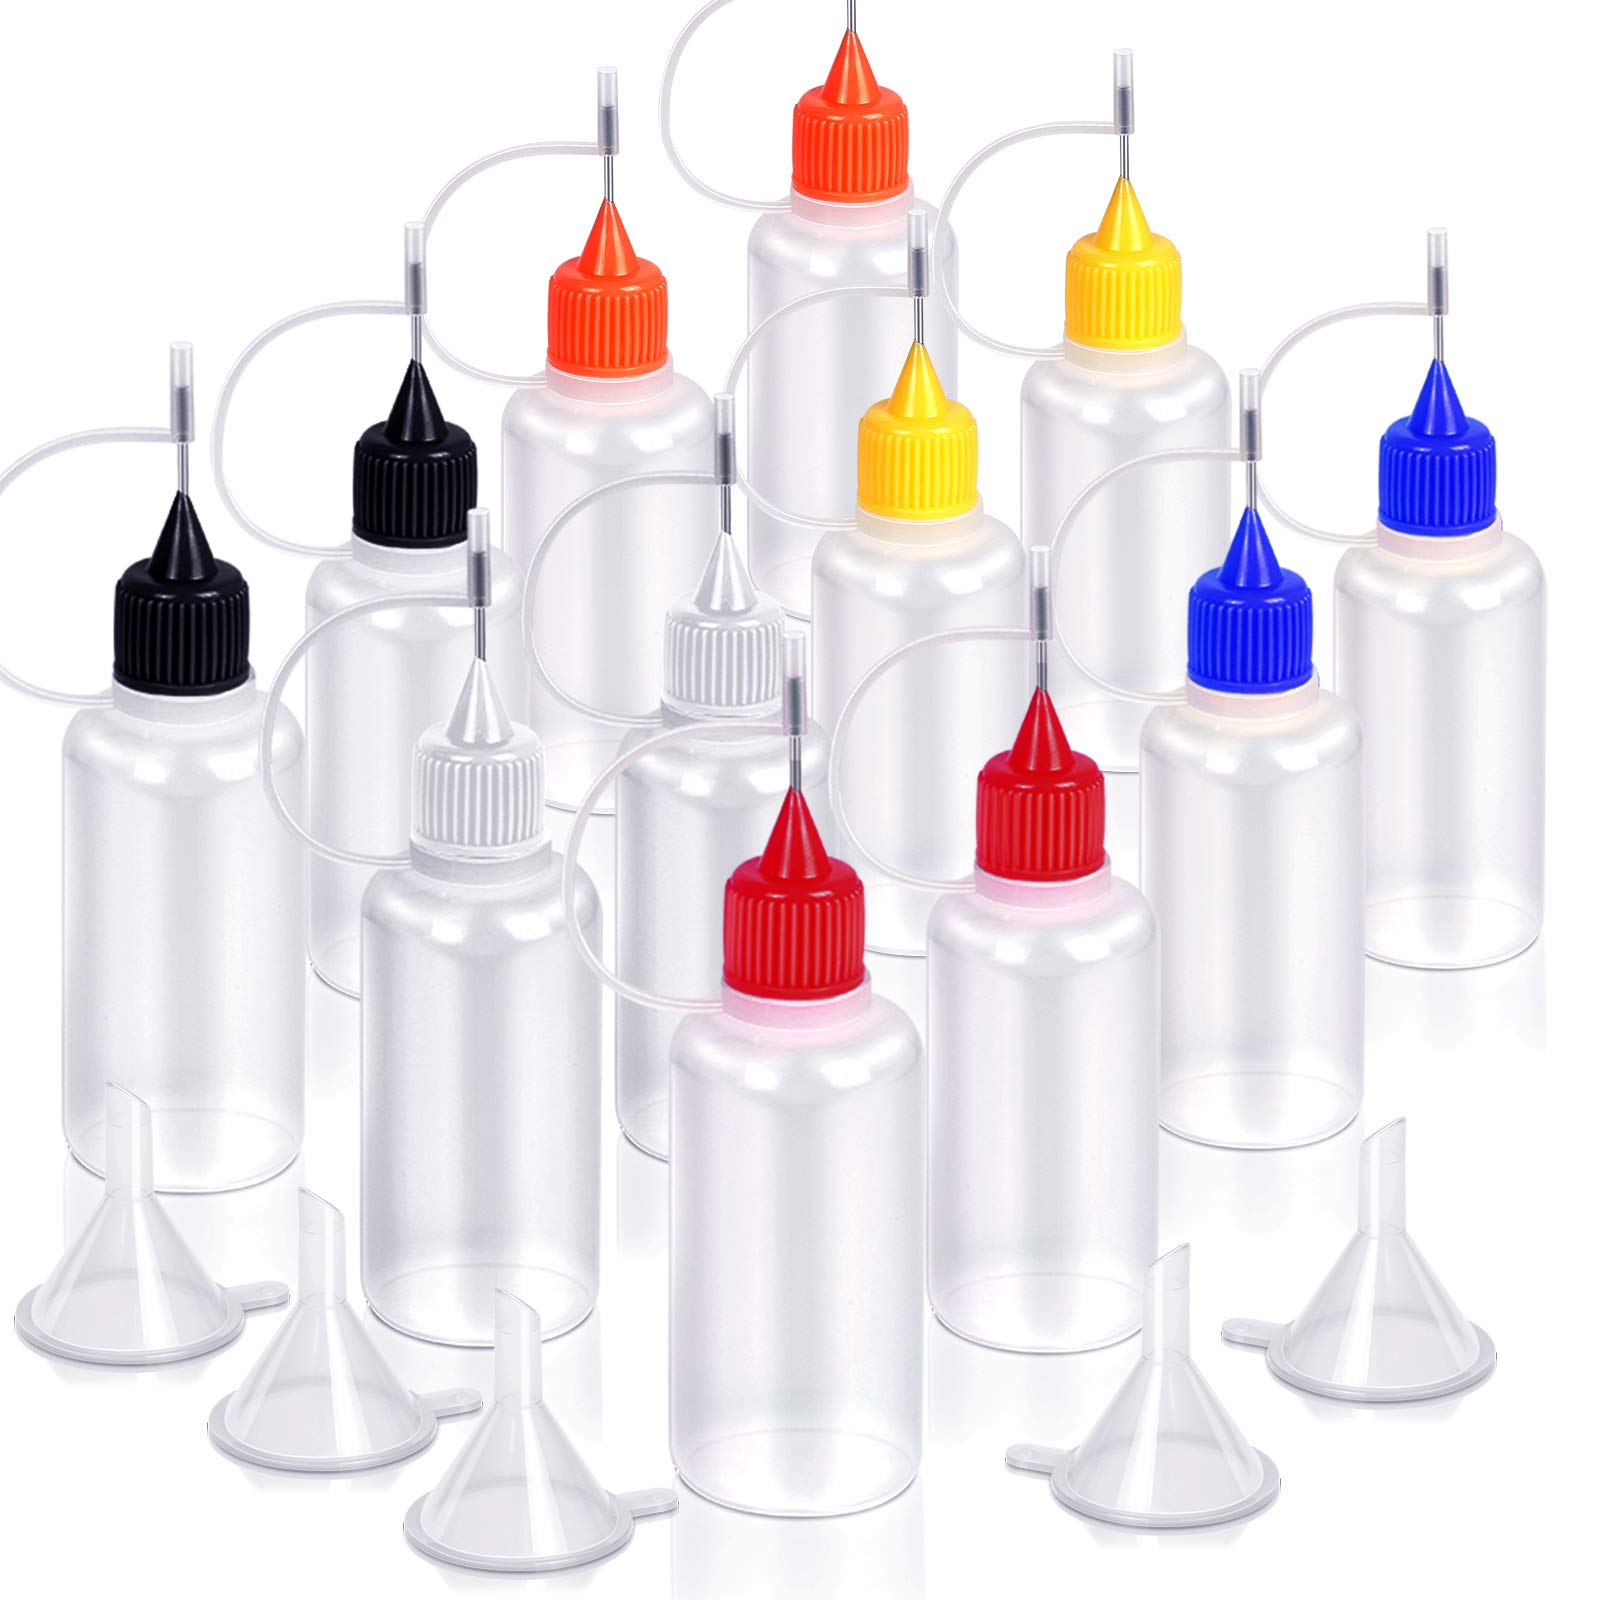 12pcs Precision Tip Applicator Bottles YGDZ 30ml Needle Tip Squeeze Glue  Bottles for Paint Quilling Craft